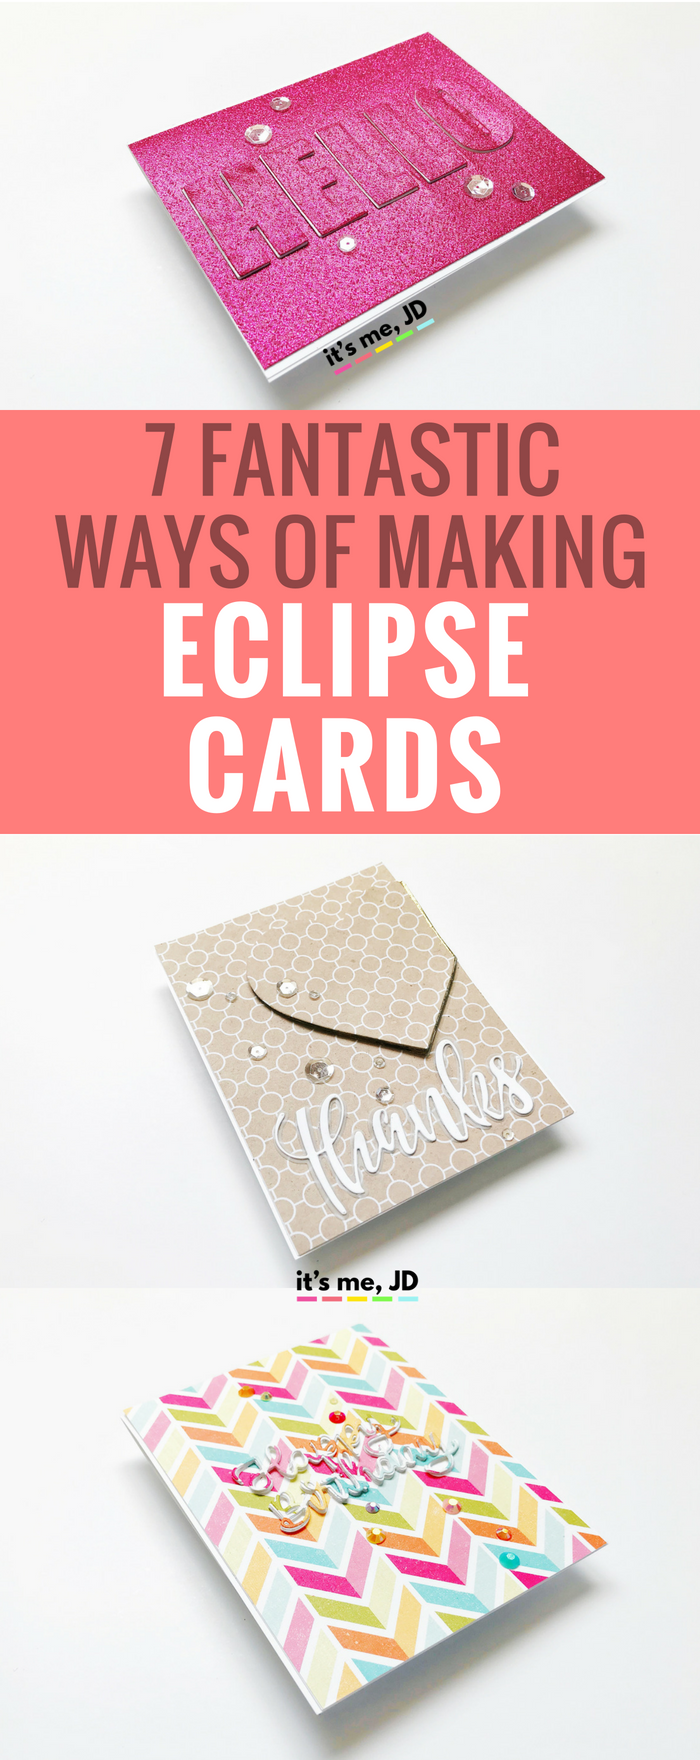 Ways Of Making Eclipse Cards, eclipse technique, tutorial #cardmaking #papercraft #handmadecard #diycard